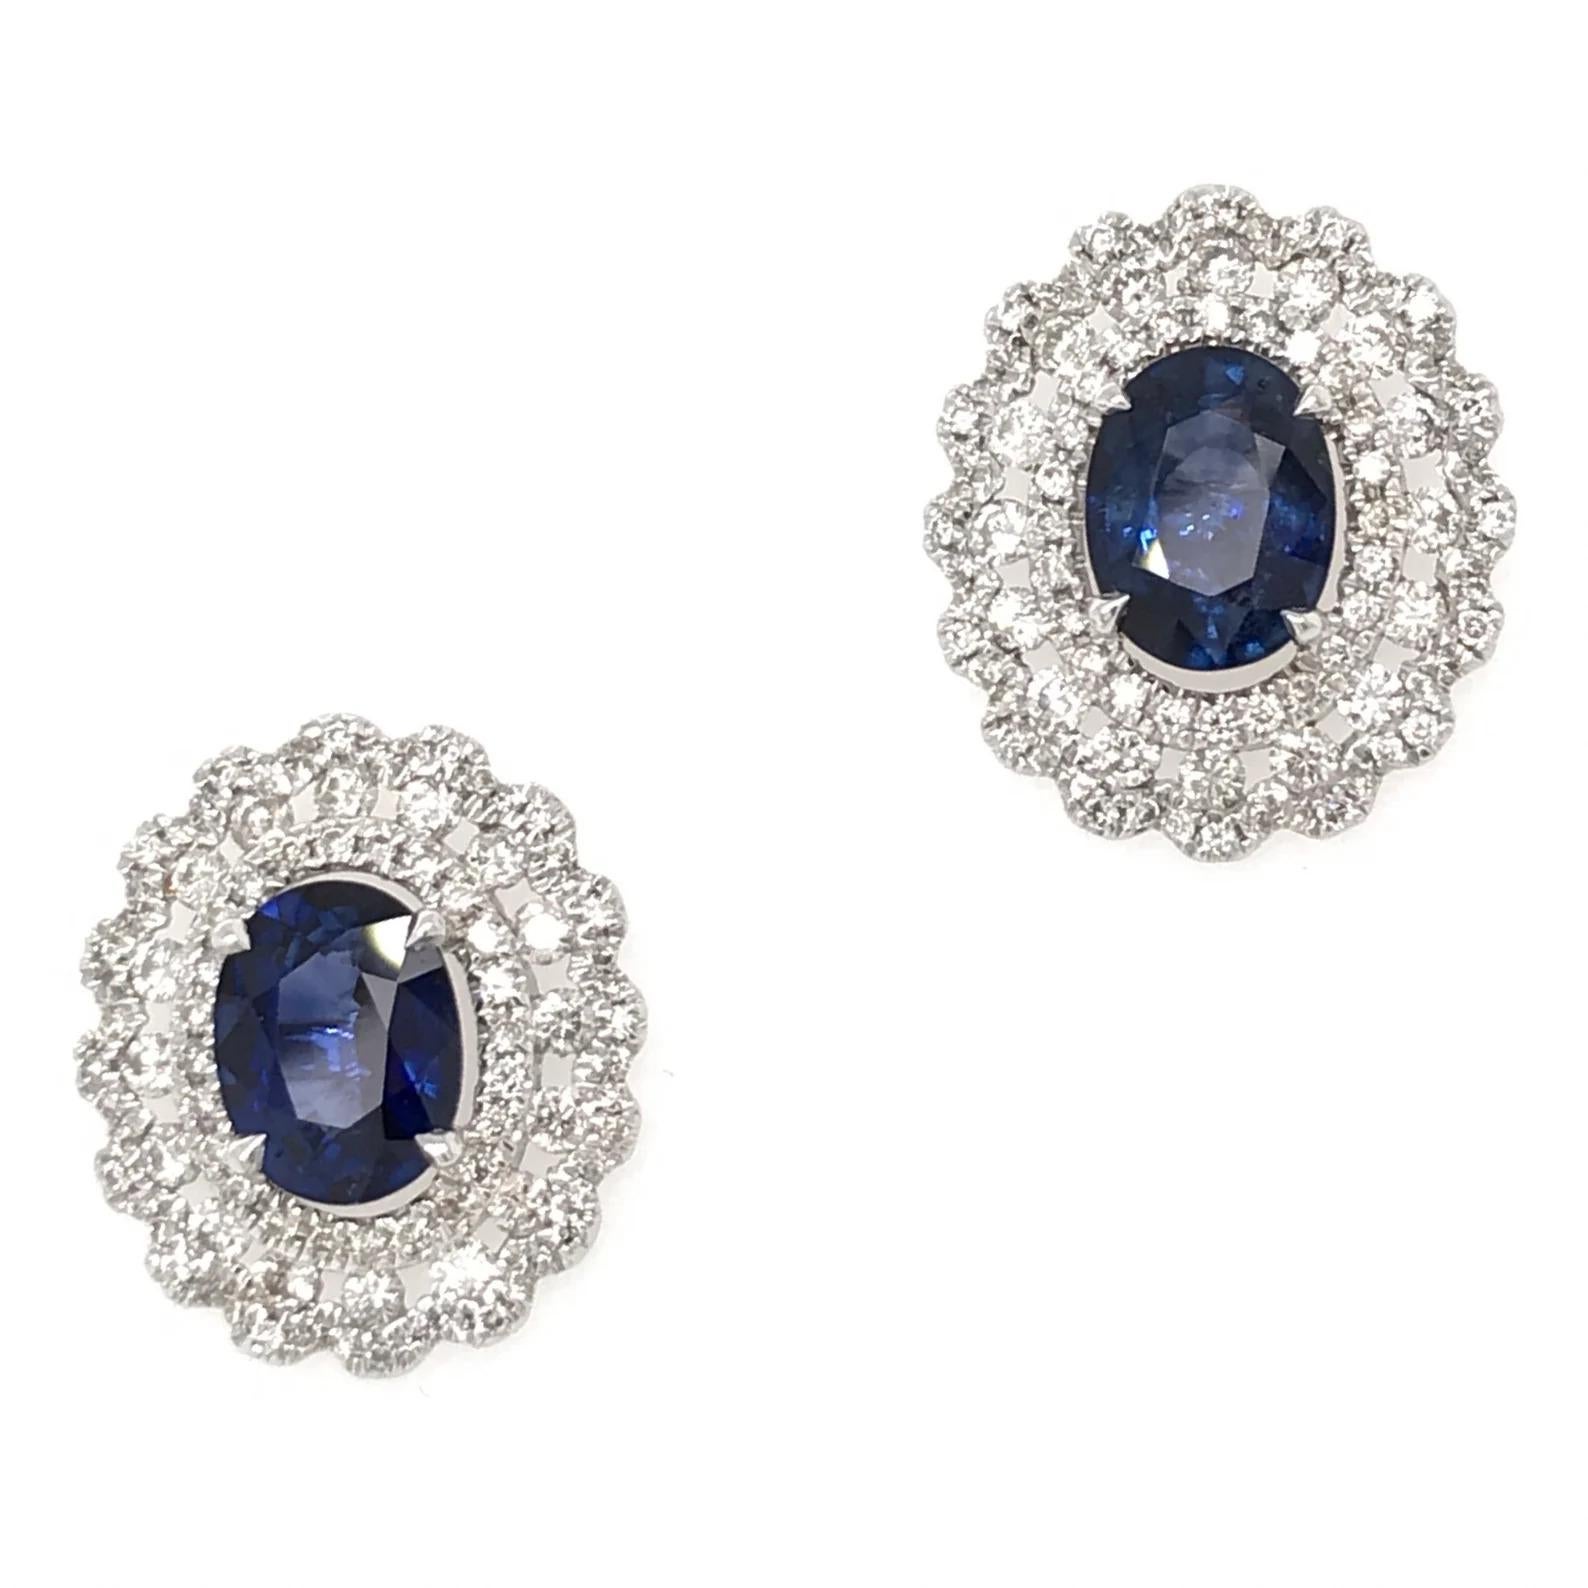 This unique earrings feature dazzling details reminiscent of antiques with the amazing quality of Sea Wave Diamonds modern craftsmanship. Bold and beautiful, these earrings are sure to make a statement.

SPECIFICATIONS
-18K White Gold
-3.10CT